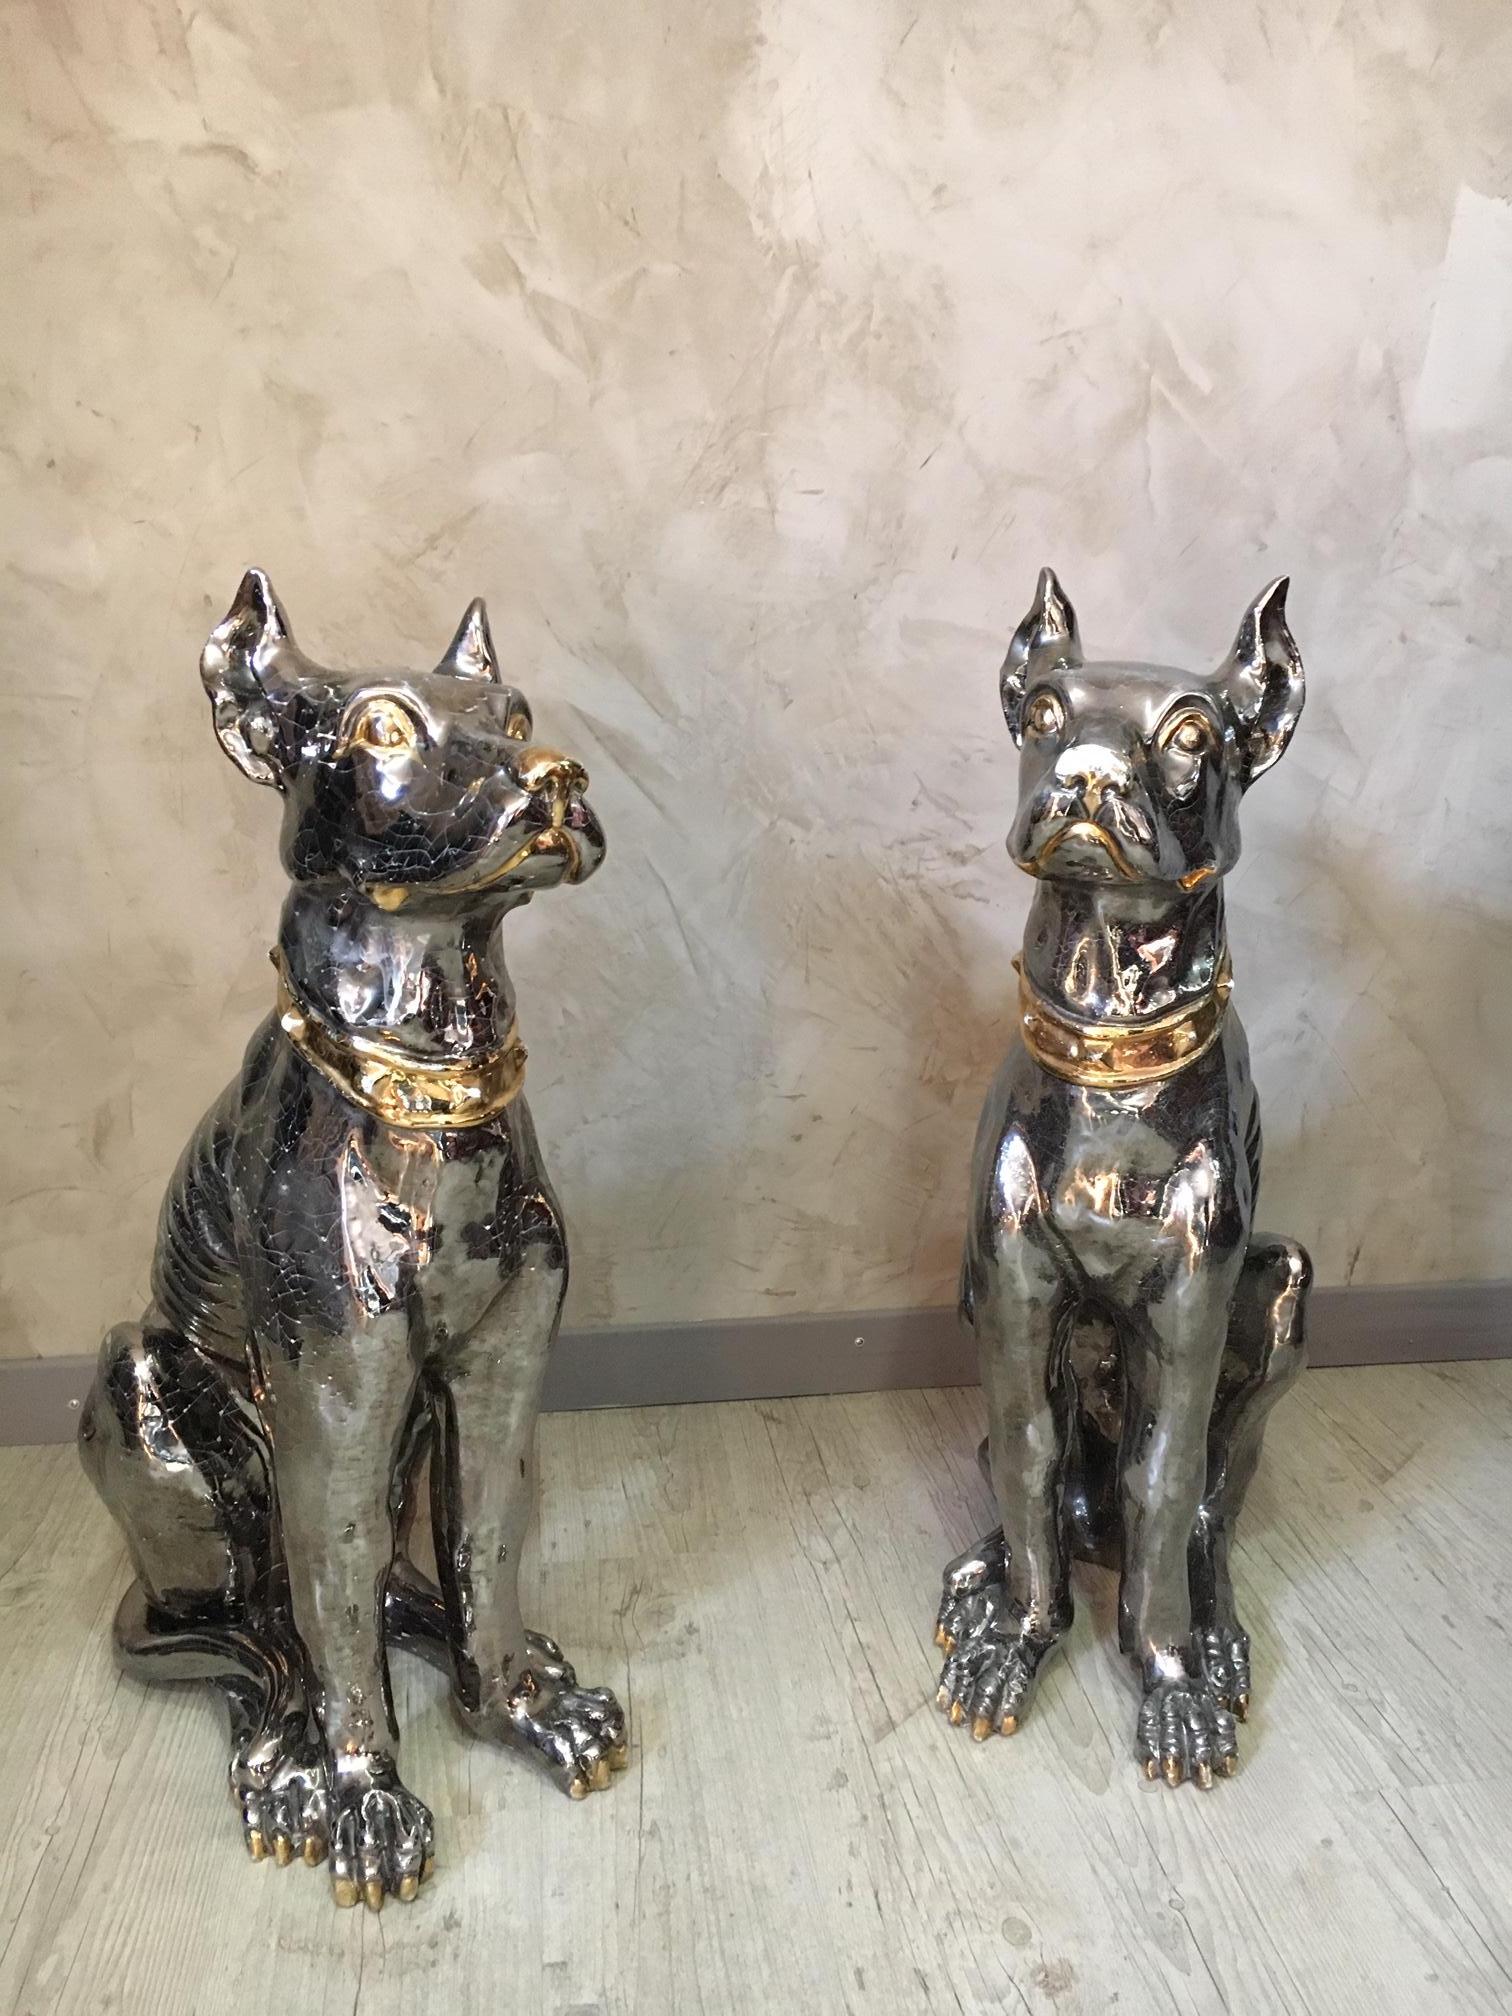 Rare and exceptional 20th century Italian pair of silver and golden patina ceramic dogs (Doberman).
Very good condition except one broken claw.